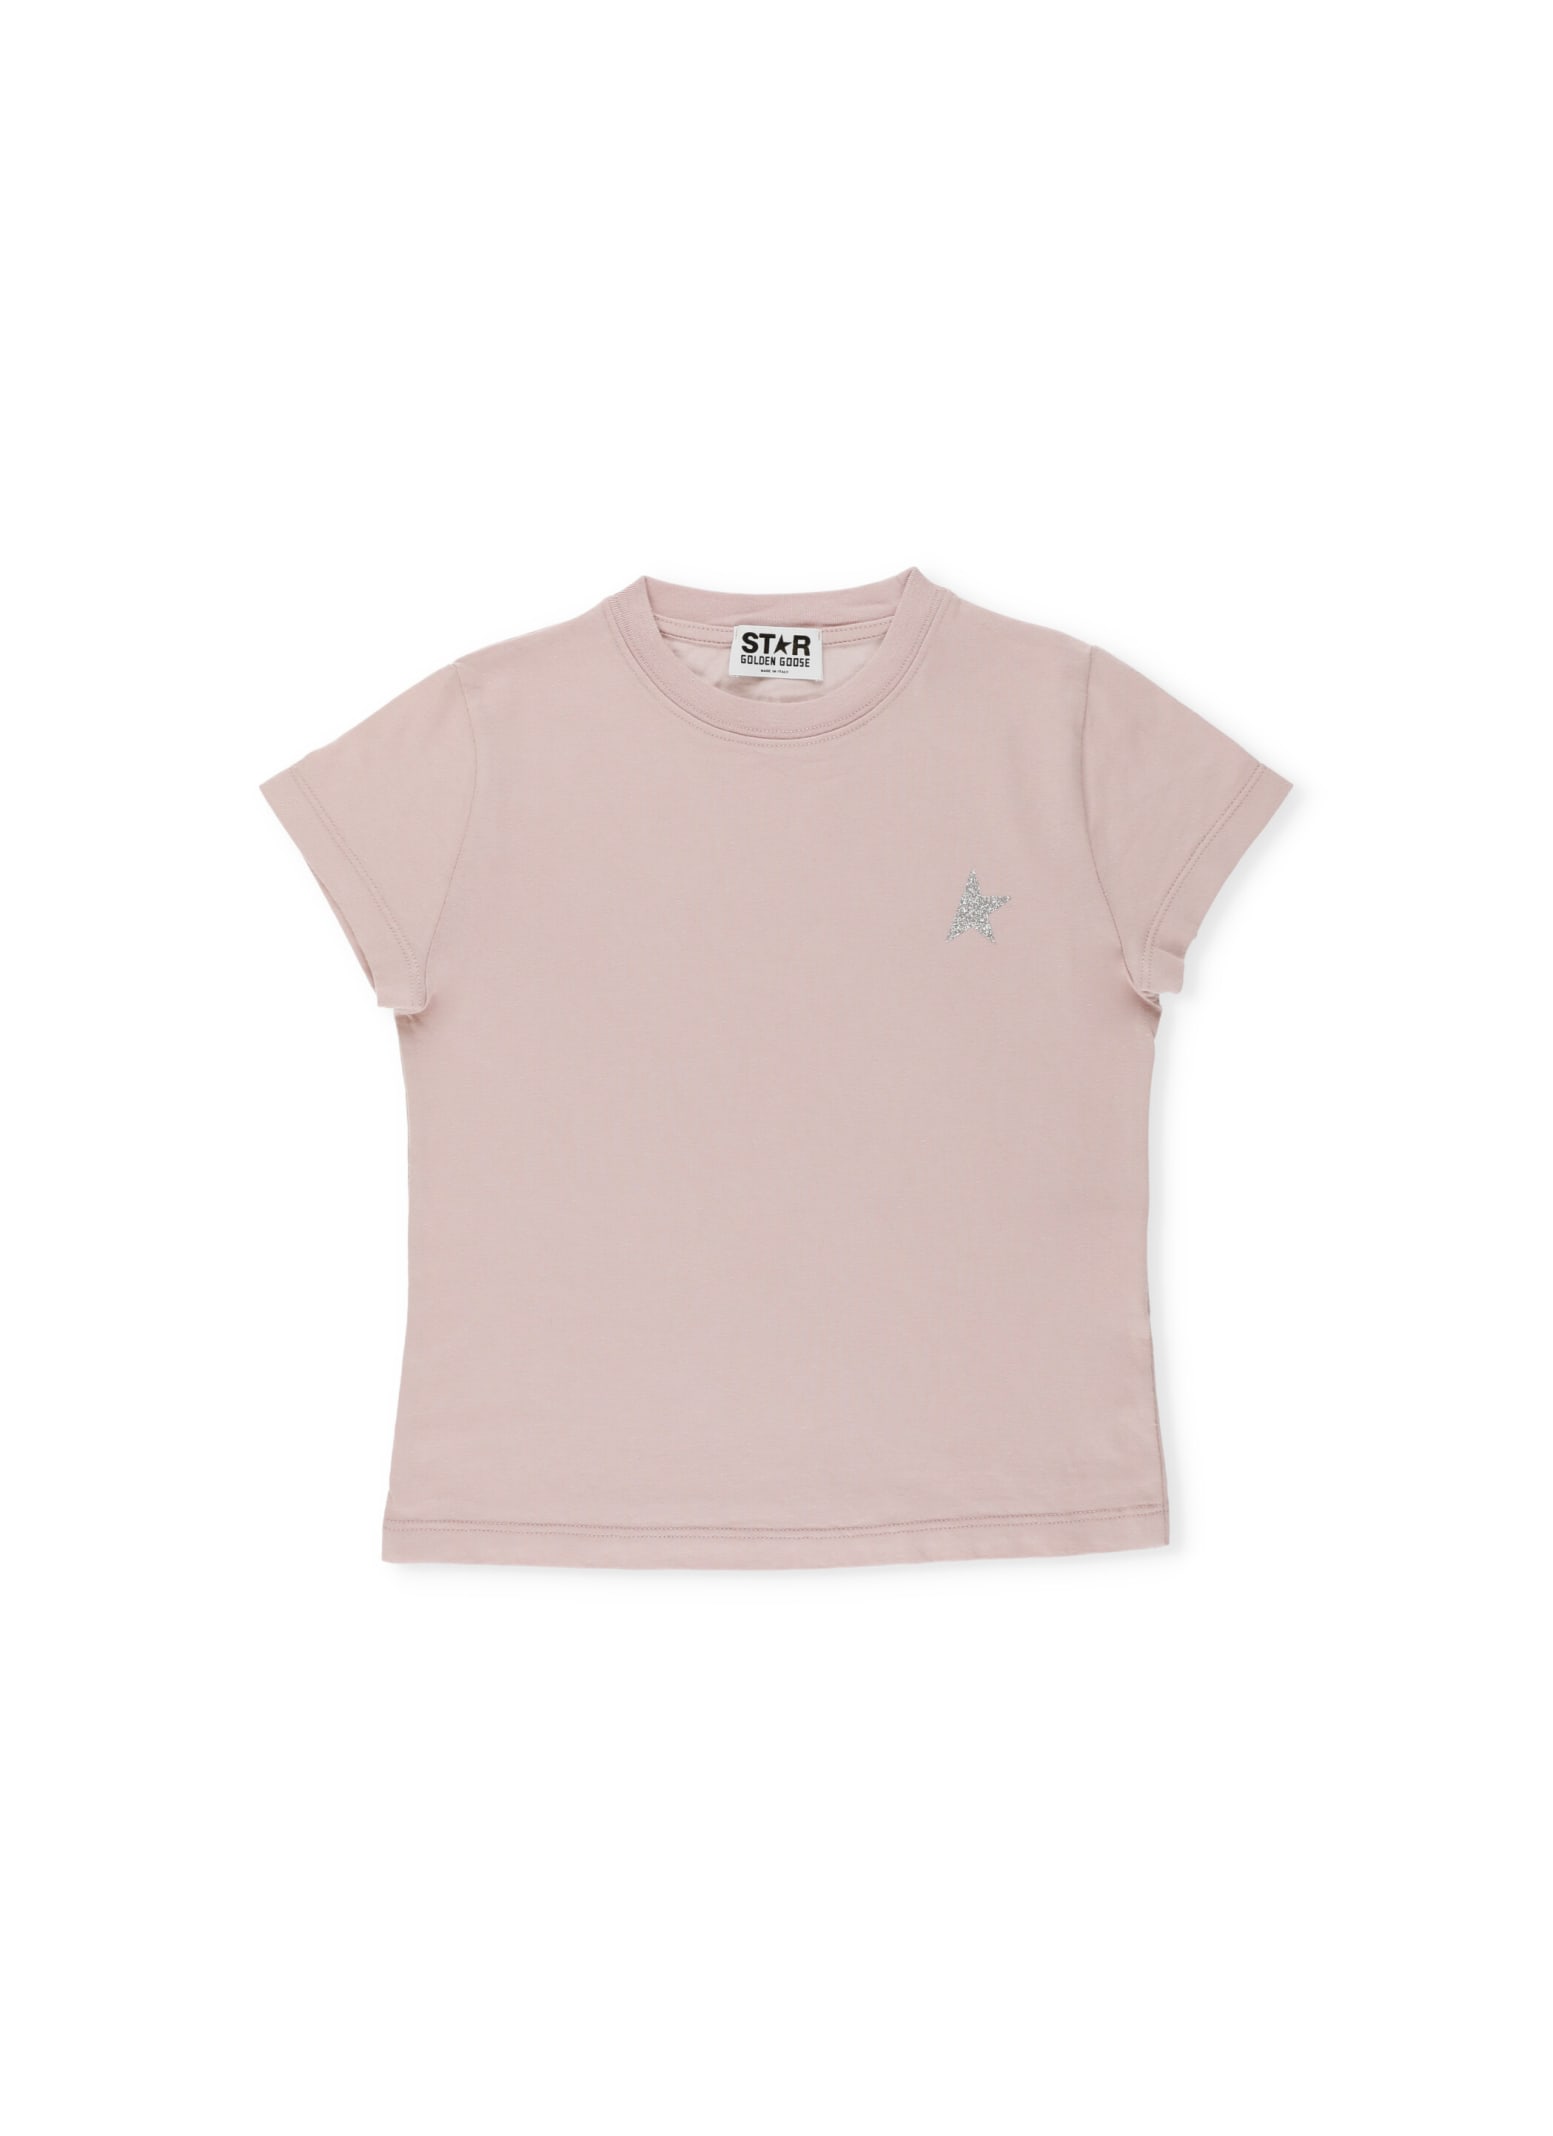 Golden Goose T-shirt With Glittered Star